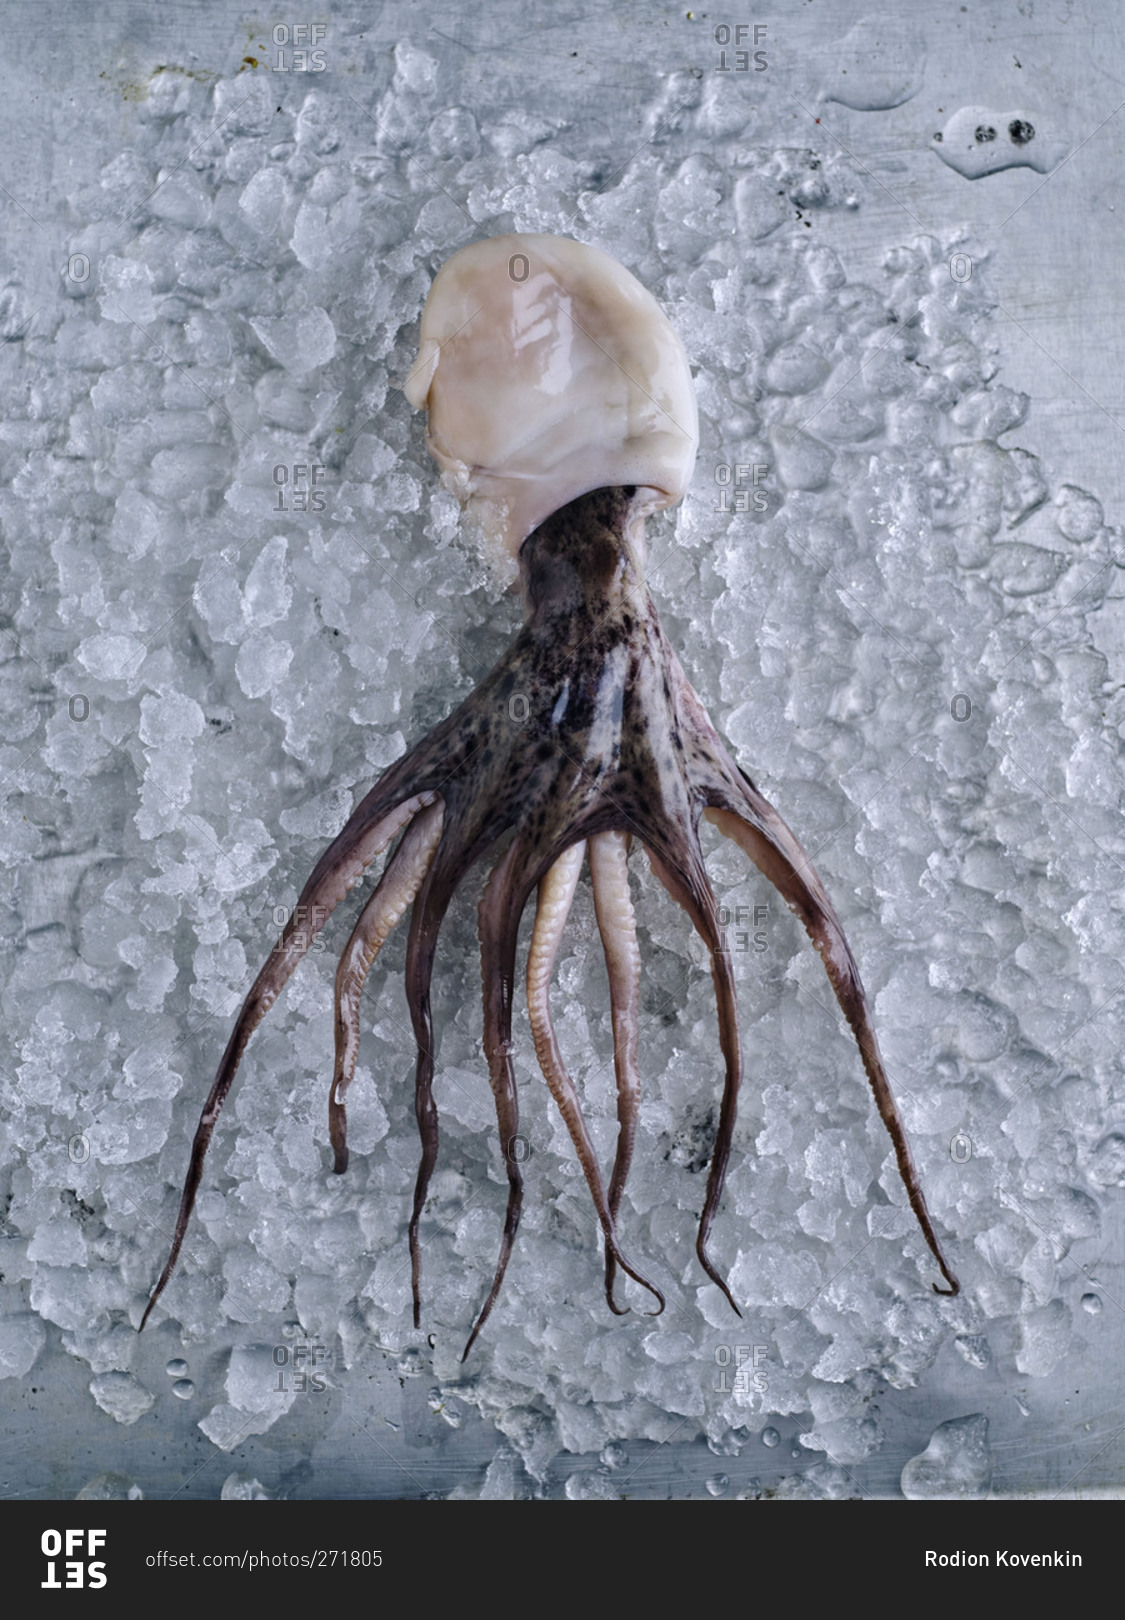 Small whole octopus on ice